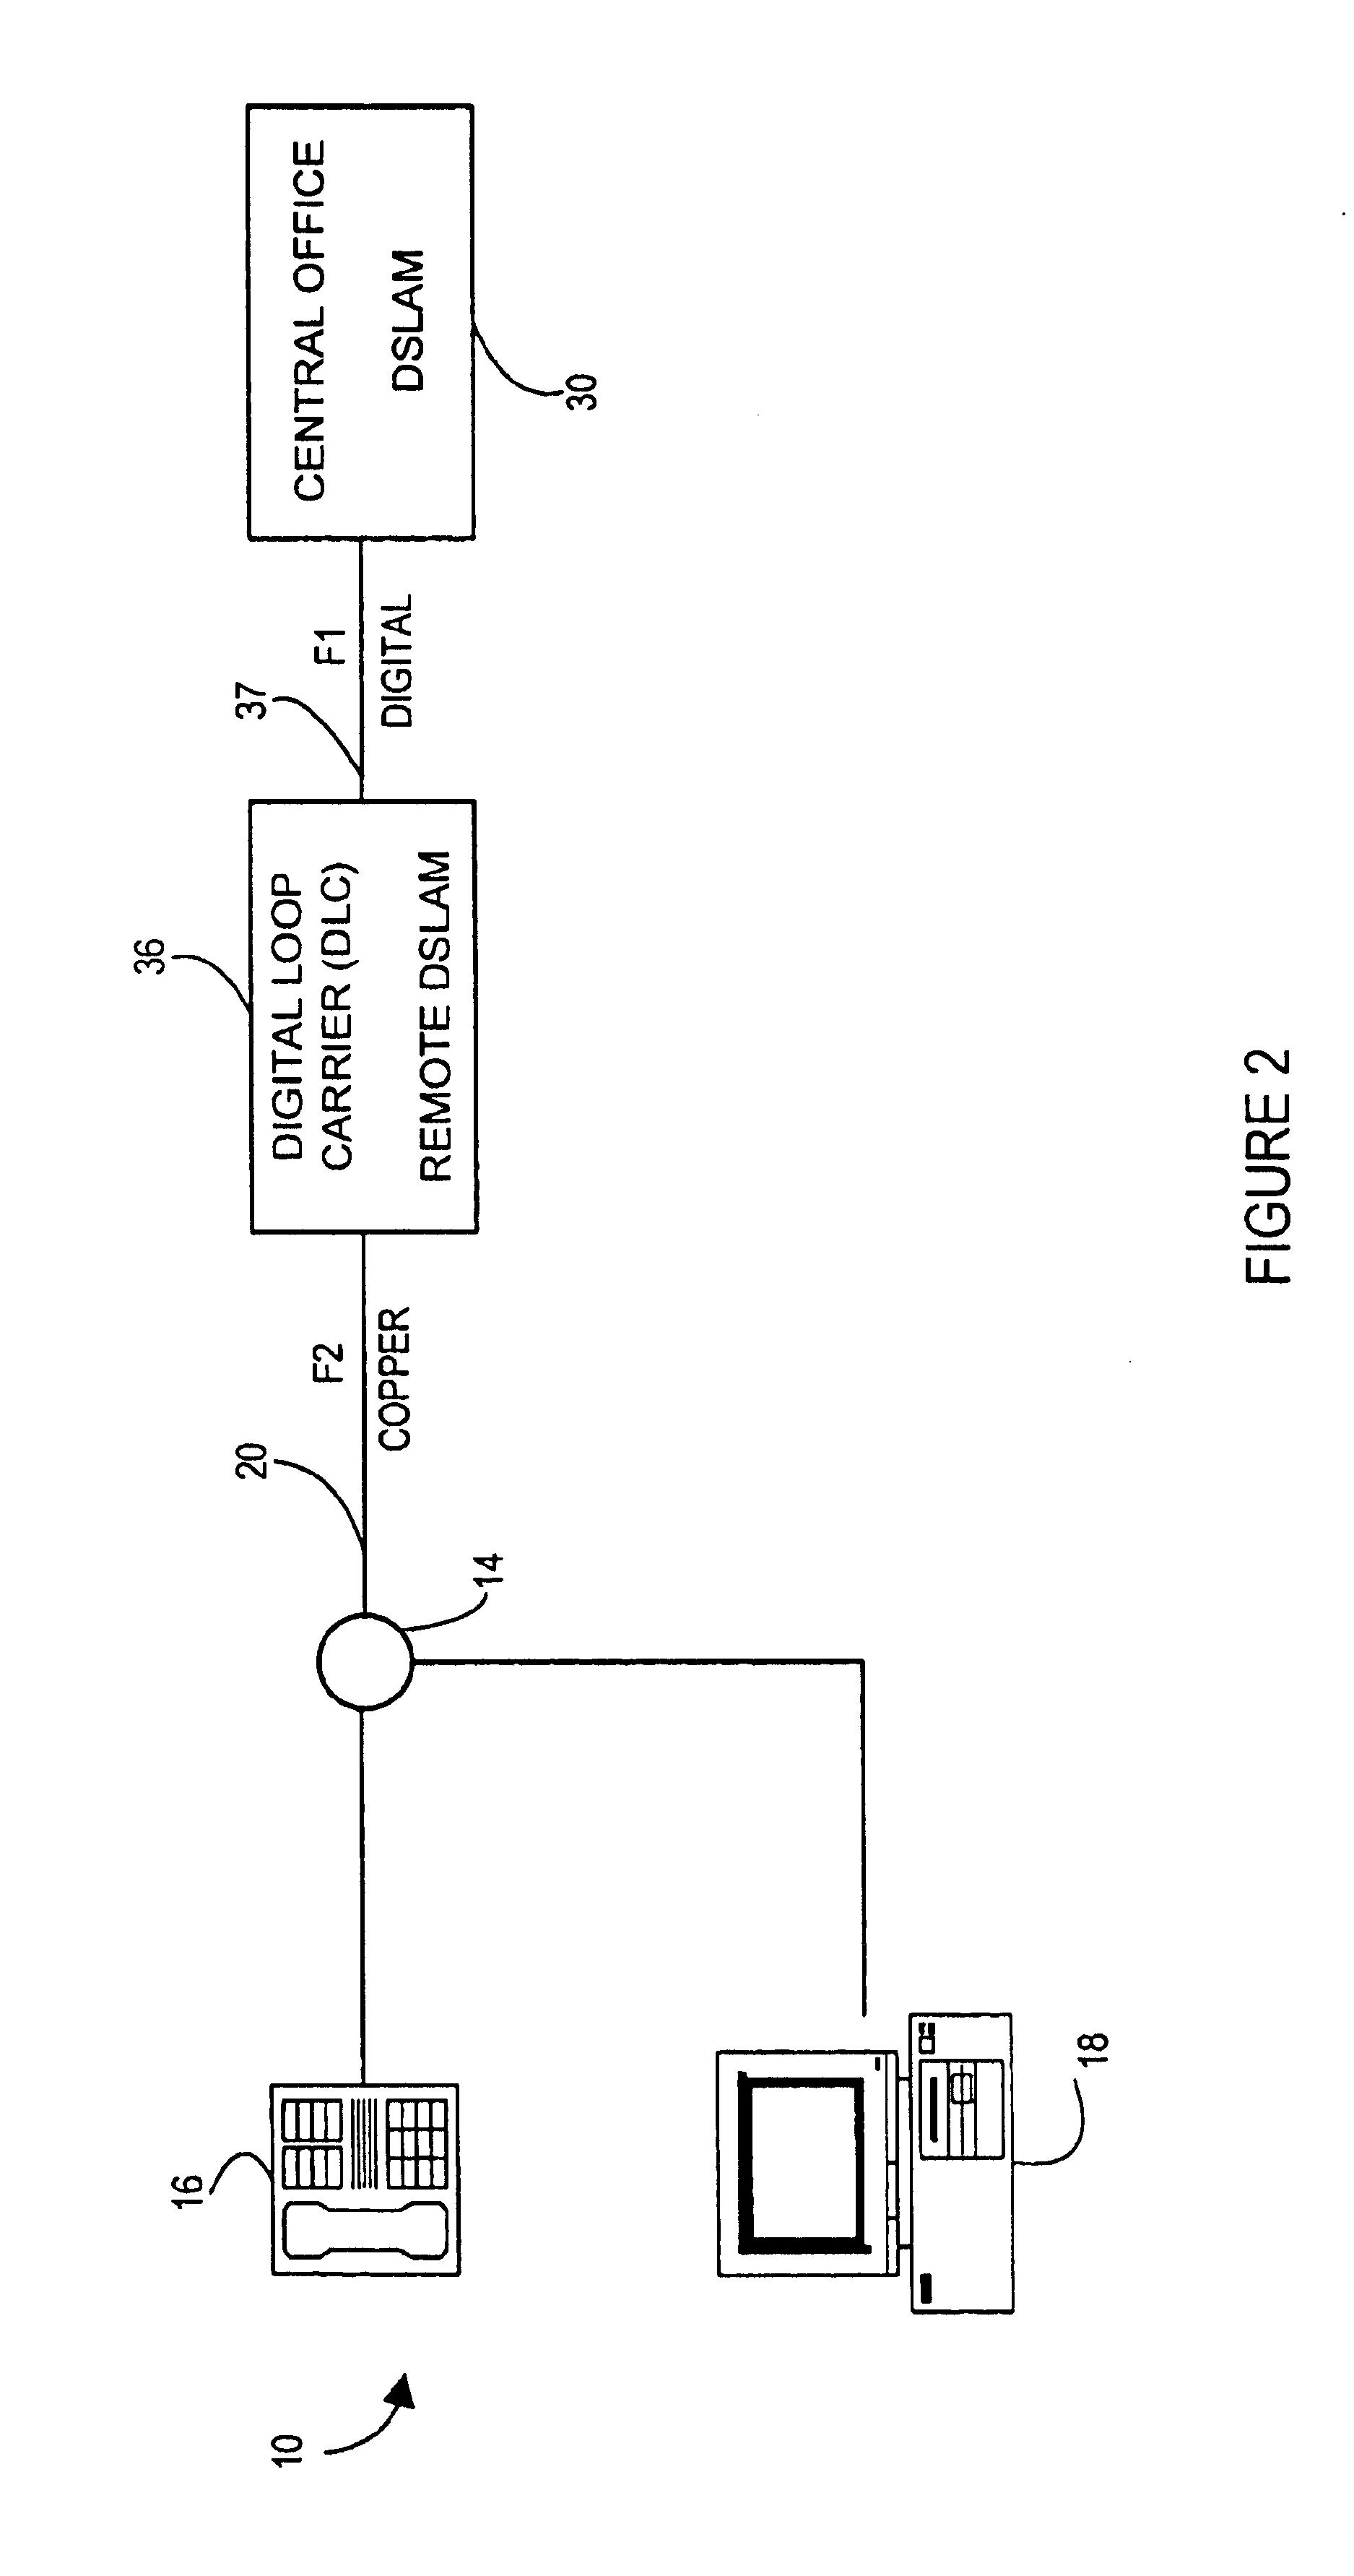 ADSL loop qualification systems and methods